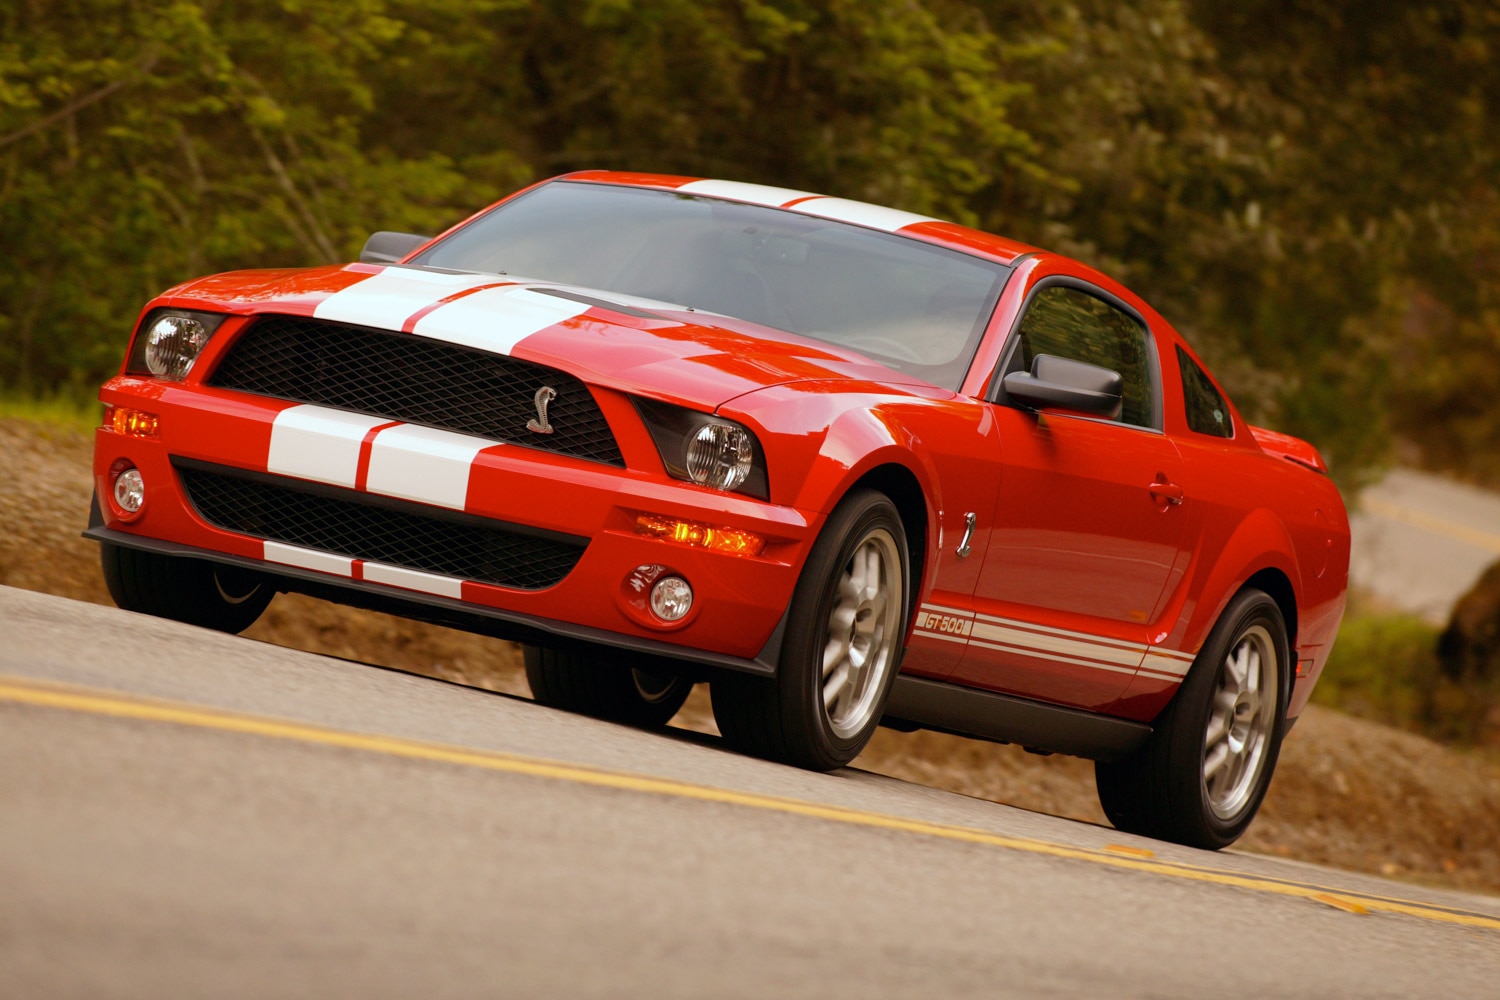 2007 Ford Mustang Shelby GT500 in red with white stripes driving on a back road